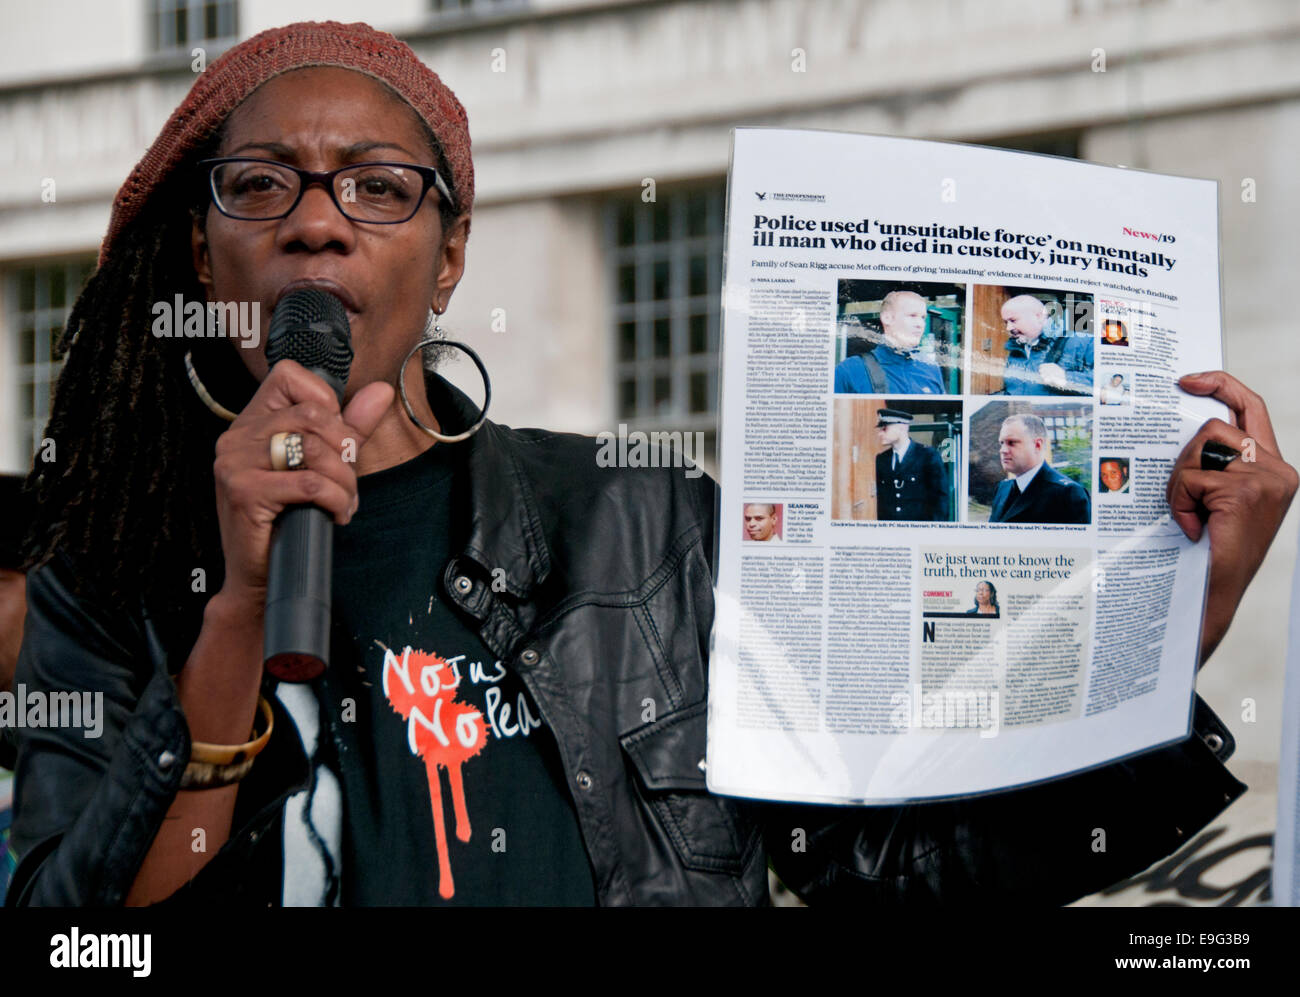 Marcia Rigg holding up article about police who used Unsuitable force on her brother Sean Rigg who died in police Custody. Stock Photo